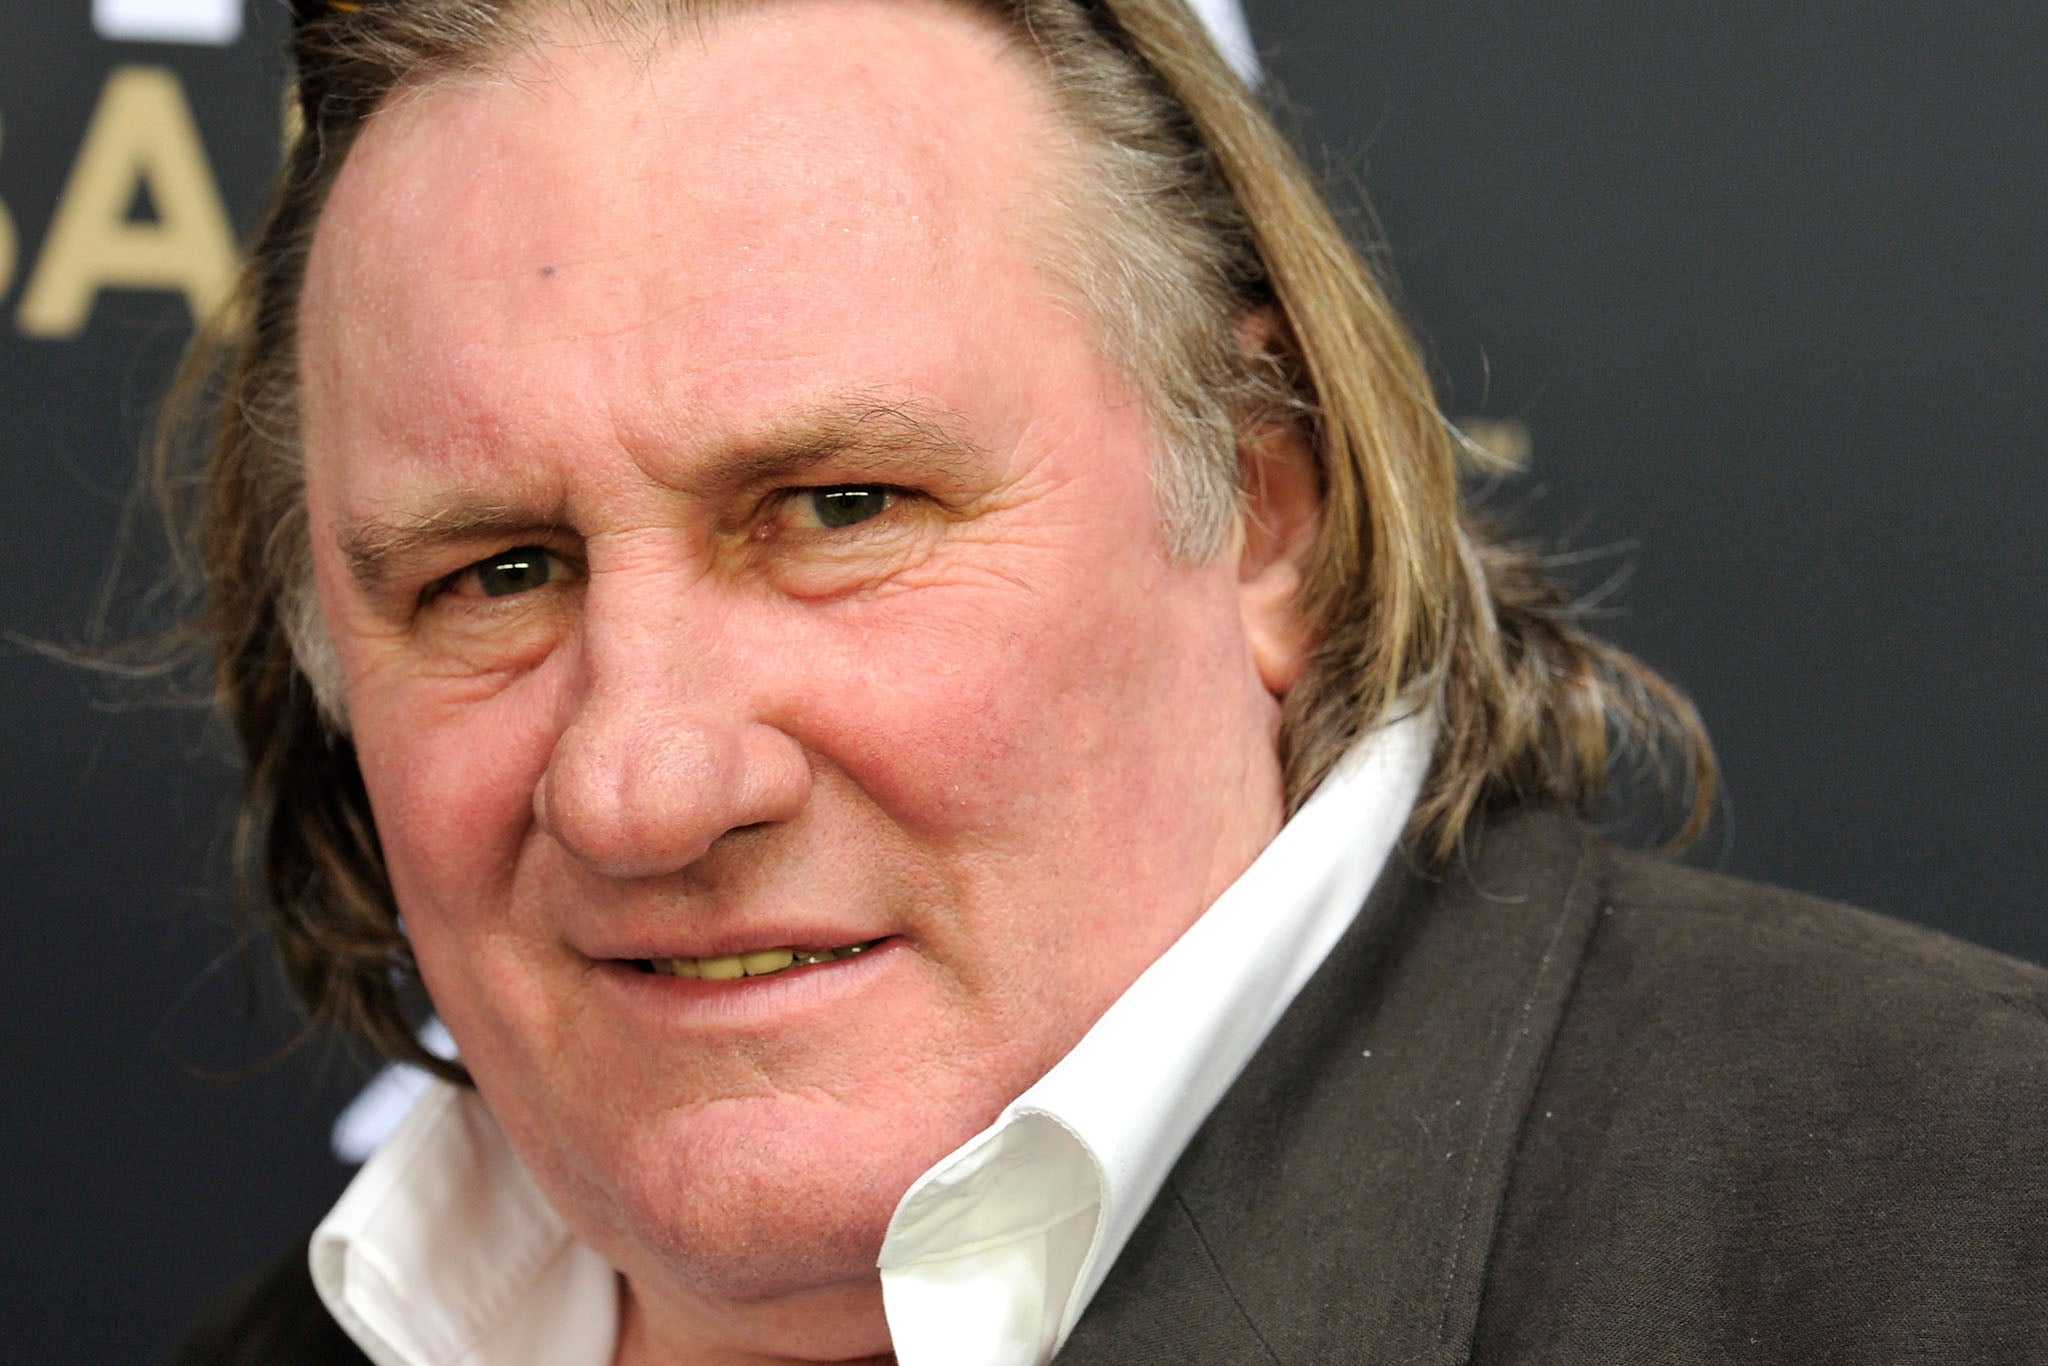 The actor Gerard Depardieu who failed to turn up to a court date on drunk driving charges